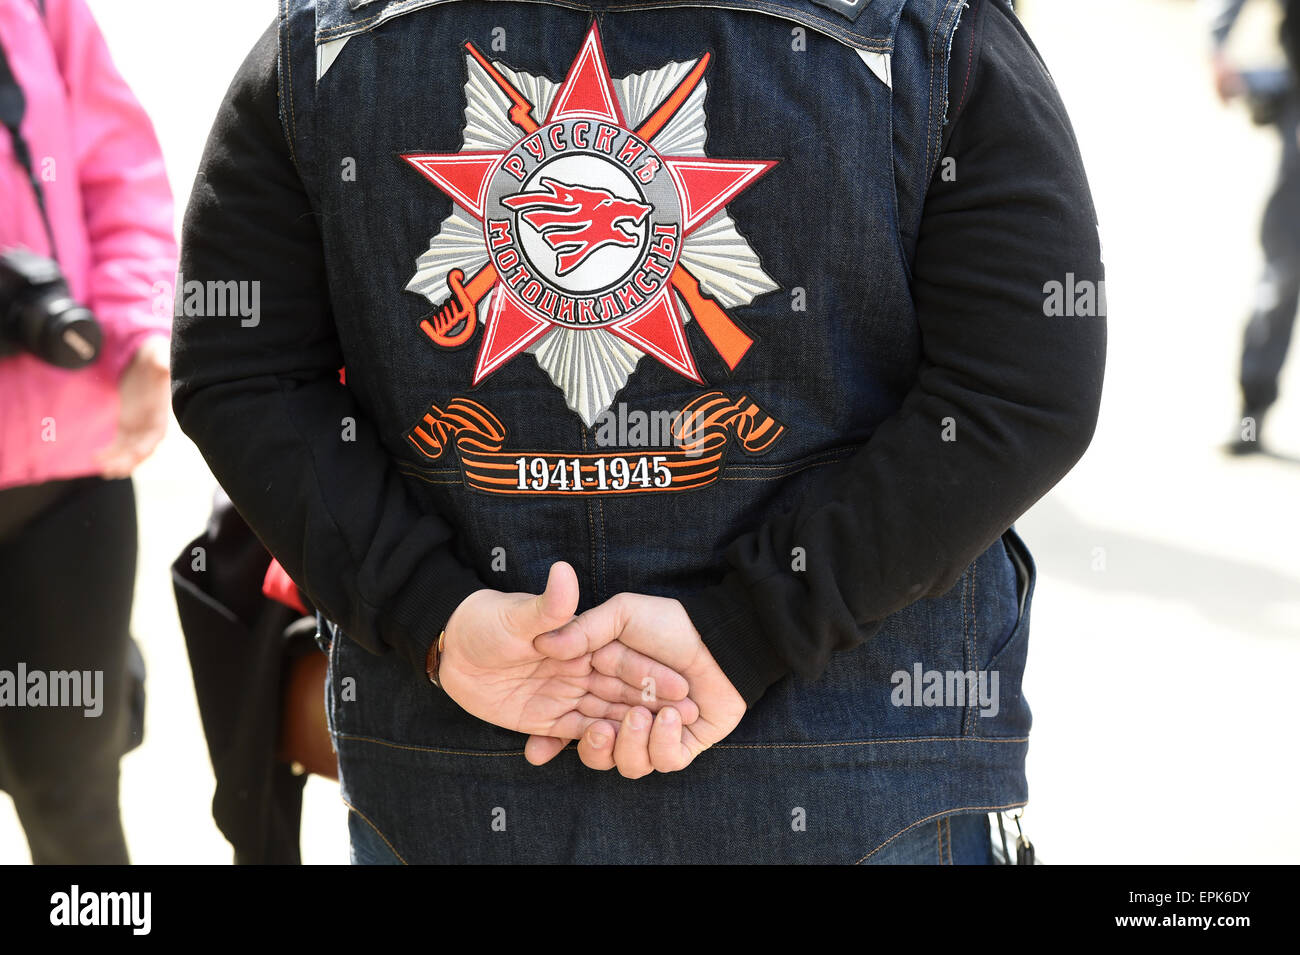 A member of the Russian motorcycle club 'Nachtwoelfe' (lit. Night wolves) wears a jacket with its logo and ribbons that consist of black and orange bicolour patterns with the writing '1941 - 1945' on it - the duration of the war with Hitler Germany - in the German-Russian Museum in Berlin, Germany, 08 May 2015. The museum is the historical place of the German Instrument of Surrender on 08 May 1945 in Berlin-Karlshorst. The Russian group started the tour on the occasion of the 70th anniversary of the End of World War II in Moscow on 25 April and arrives in Berlin on 09 May - when Russia observe Stock Photo